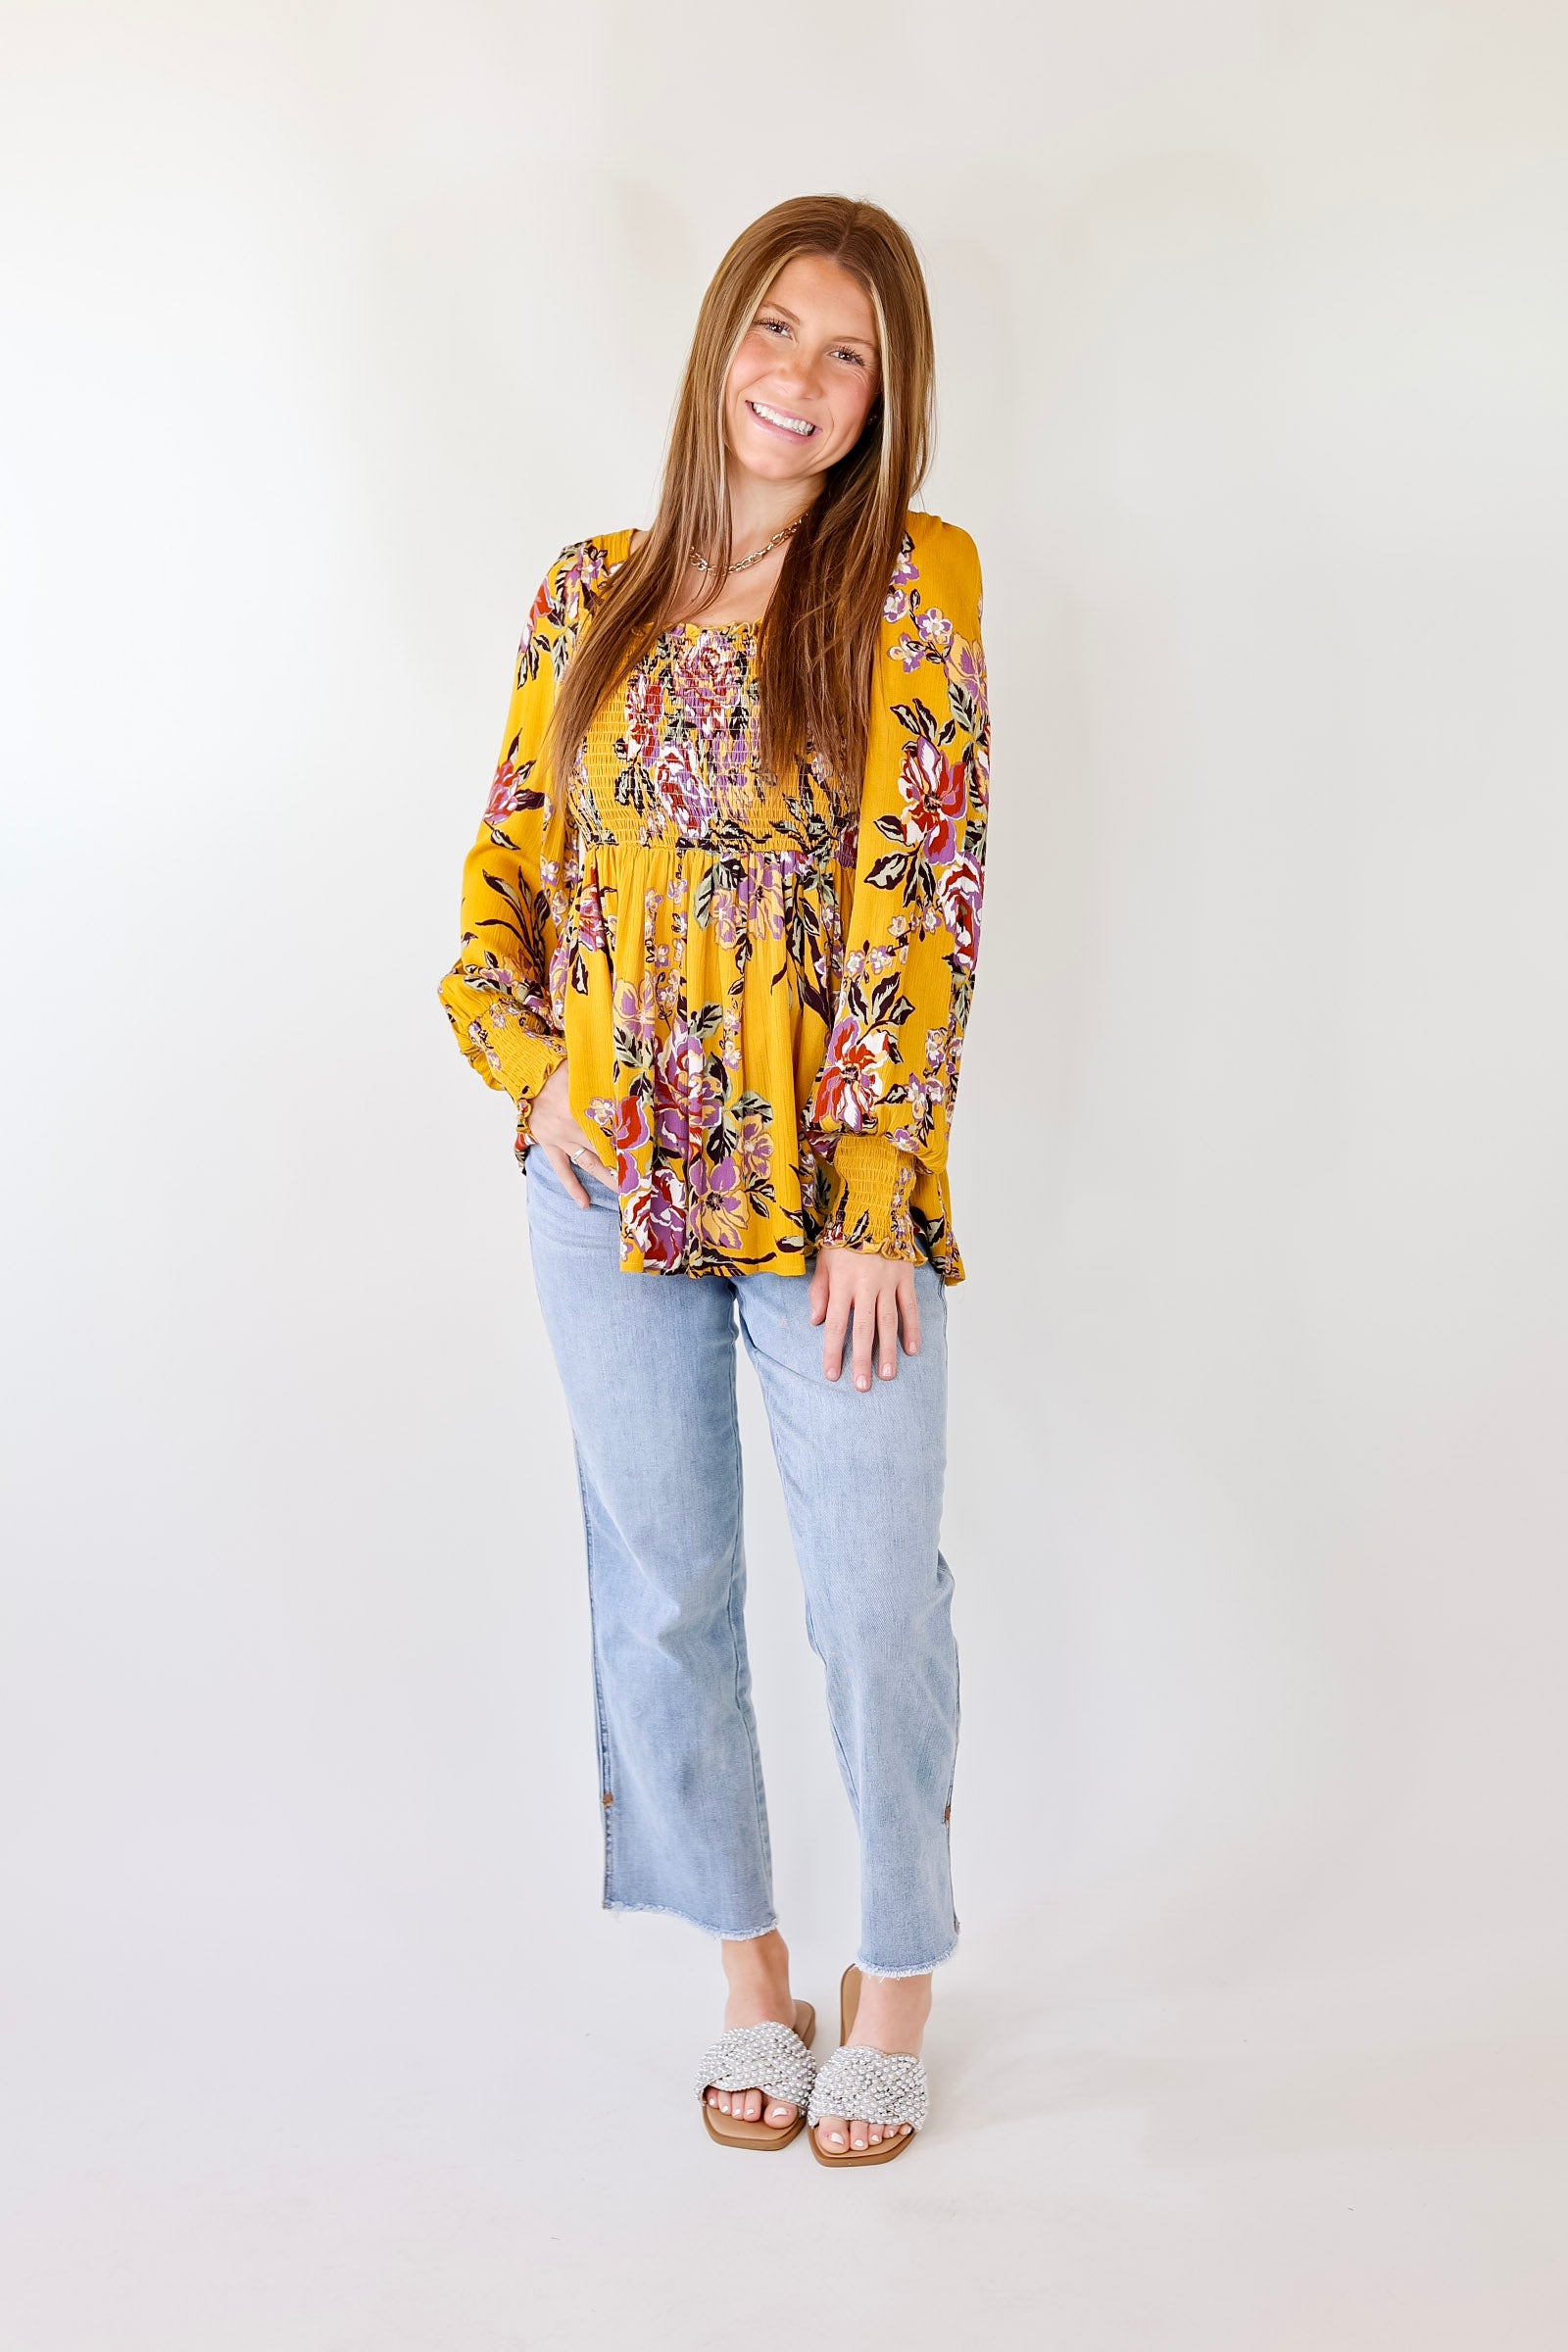 Fairfield Feeling Floral Smocked Babydoll Top with Long Sleeves in Mustard Yellow - Giddy Up Glamour Boutique